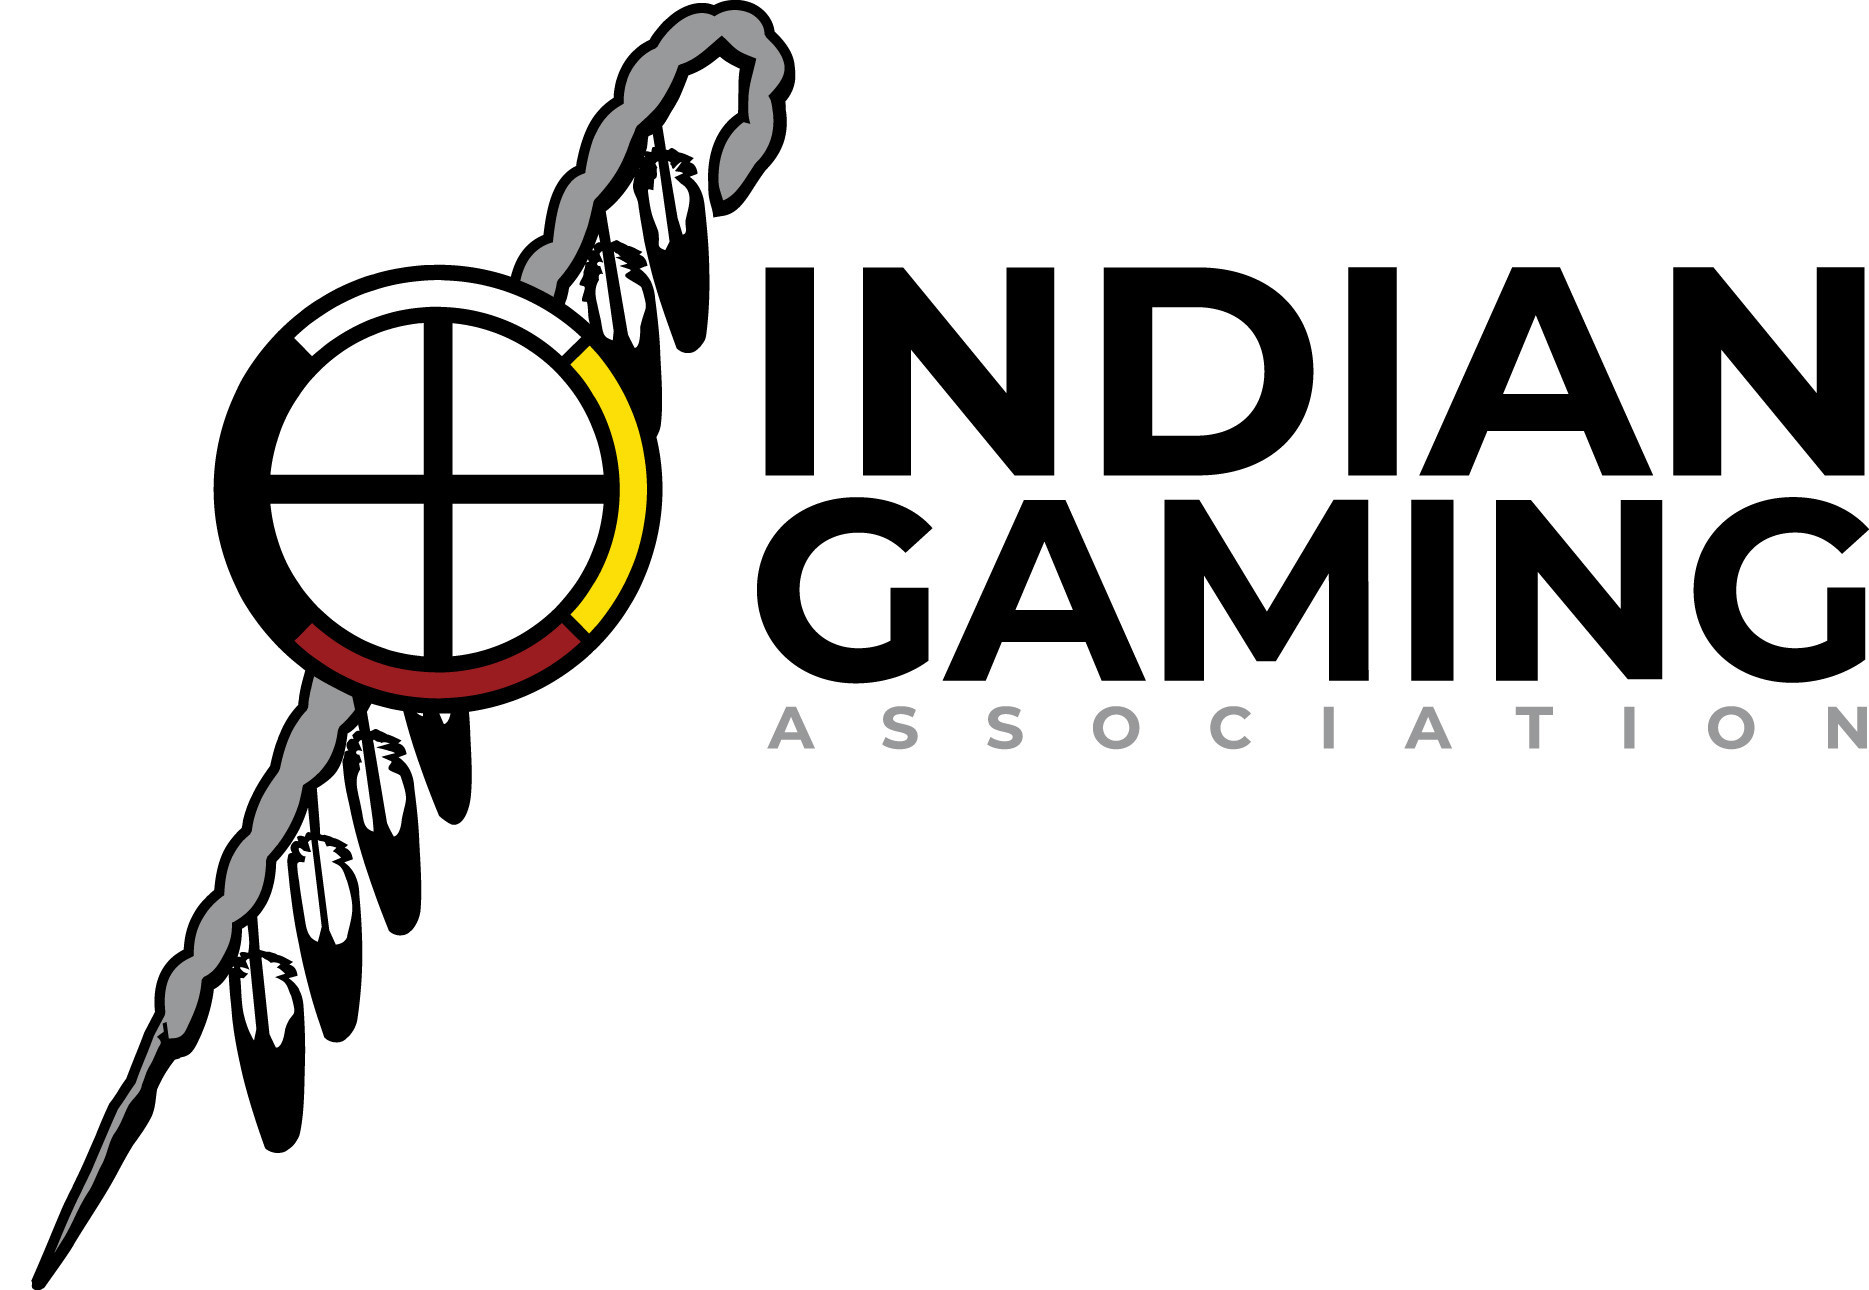 INDIAN GAMING ASSOCIATION TO CONVENE LARGEST GATHERING OF TRIBAL